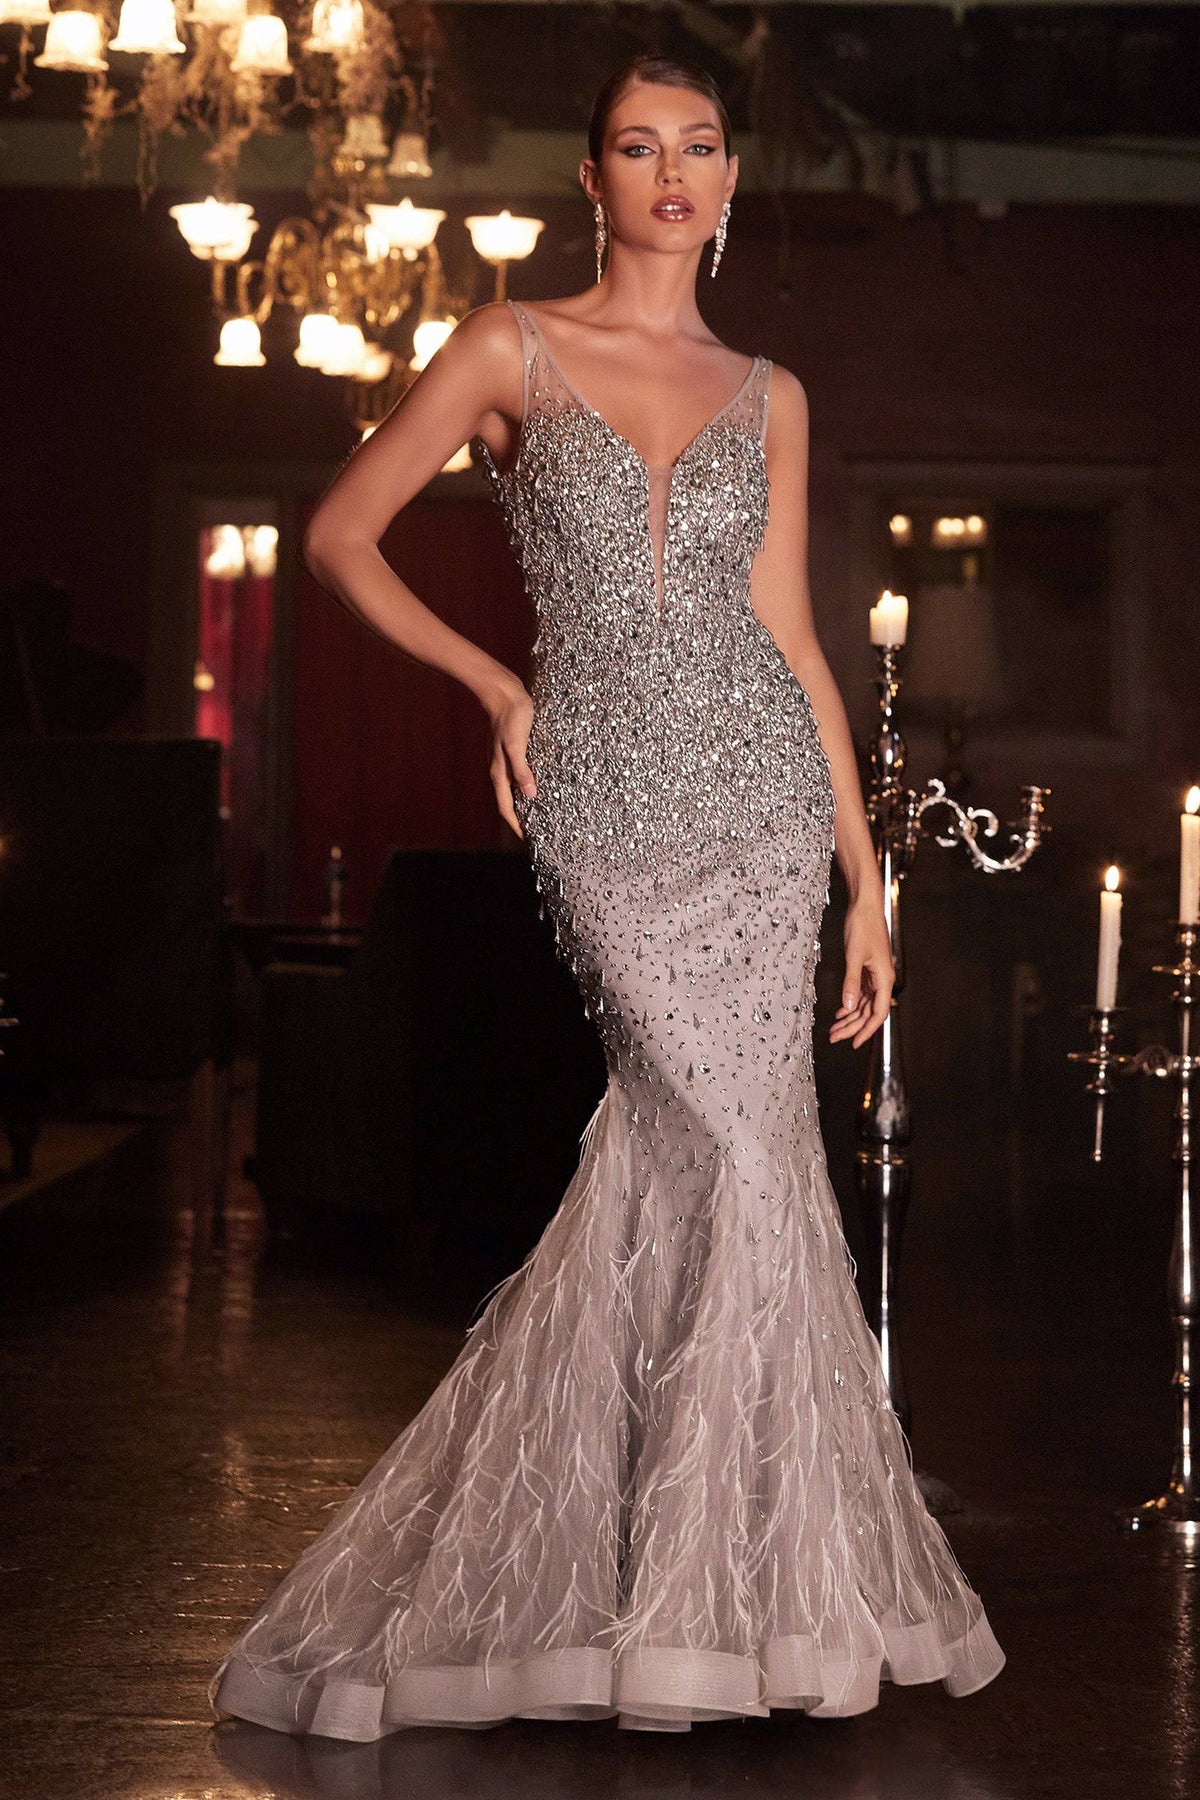 Striking Crystal-Infused Gown with Deep Neckline Slit and Long Skirt #CDB718 - NORMA REED